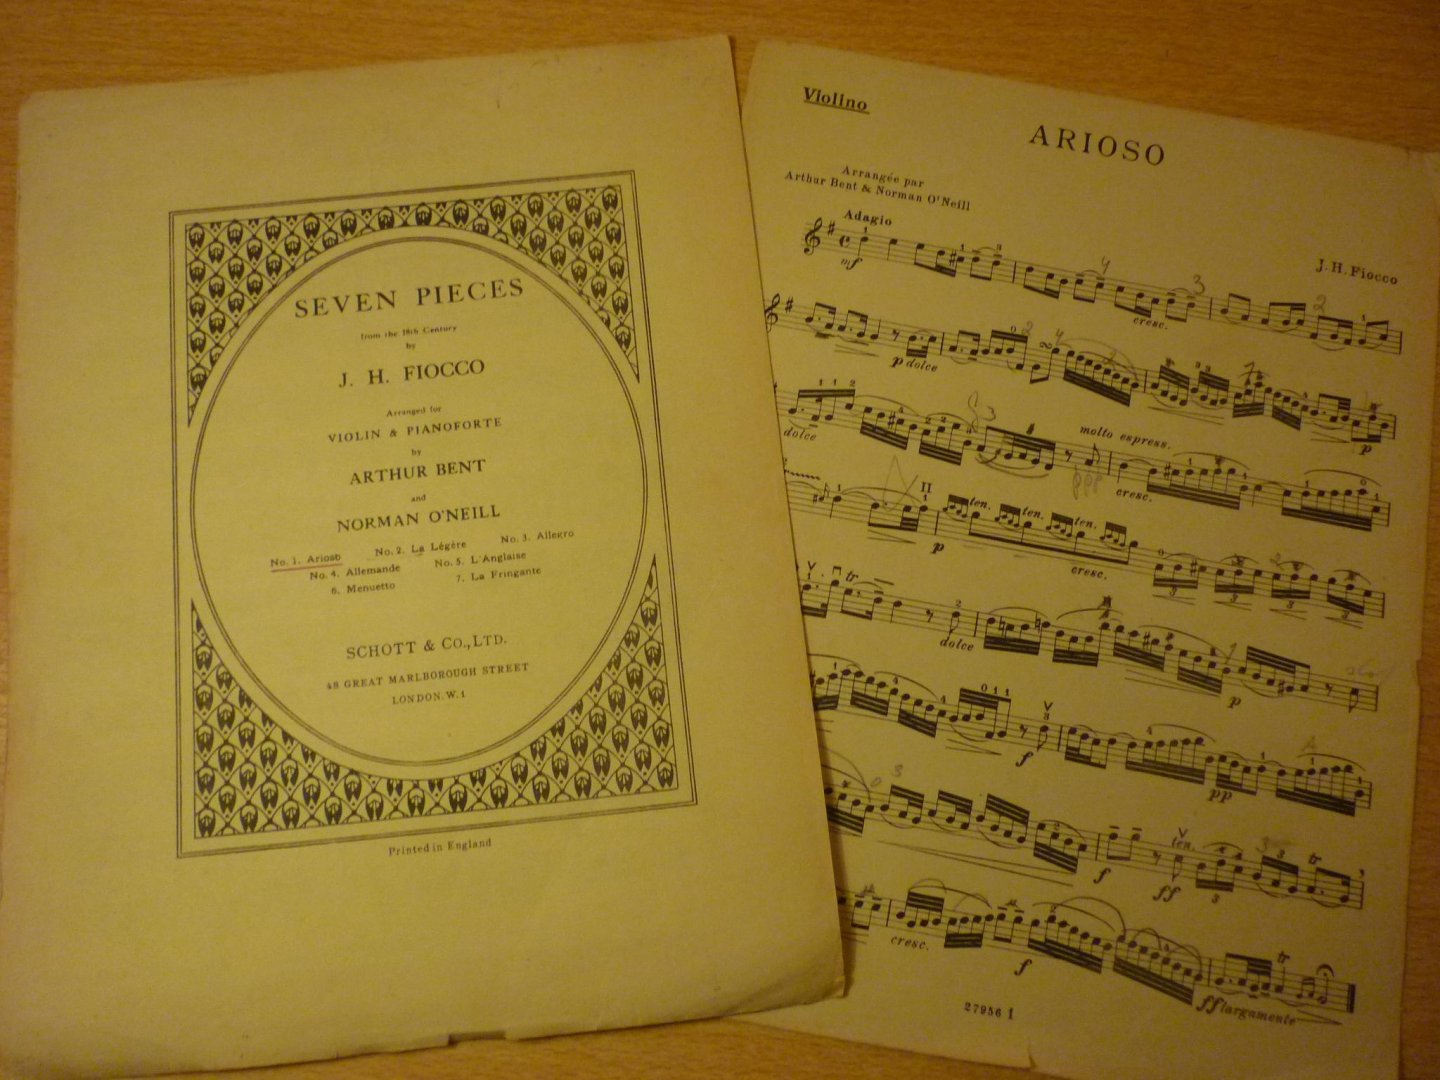 Fiocco; Joseph-Hector  (1703–1741) - Arioso; No. 1 (Seven pieces from the 18th Century); (arranged by Arthur Bent and Norman O'Neill